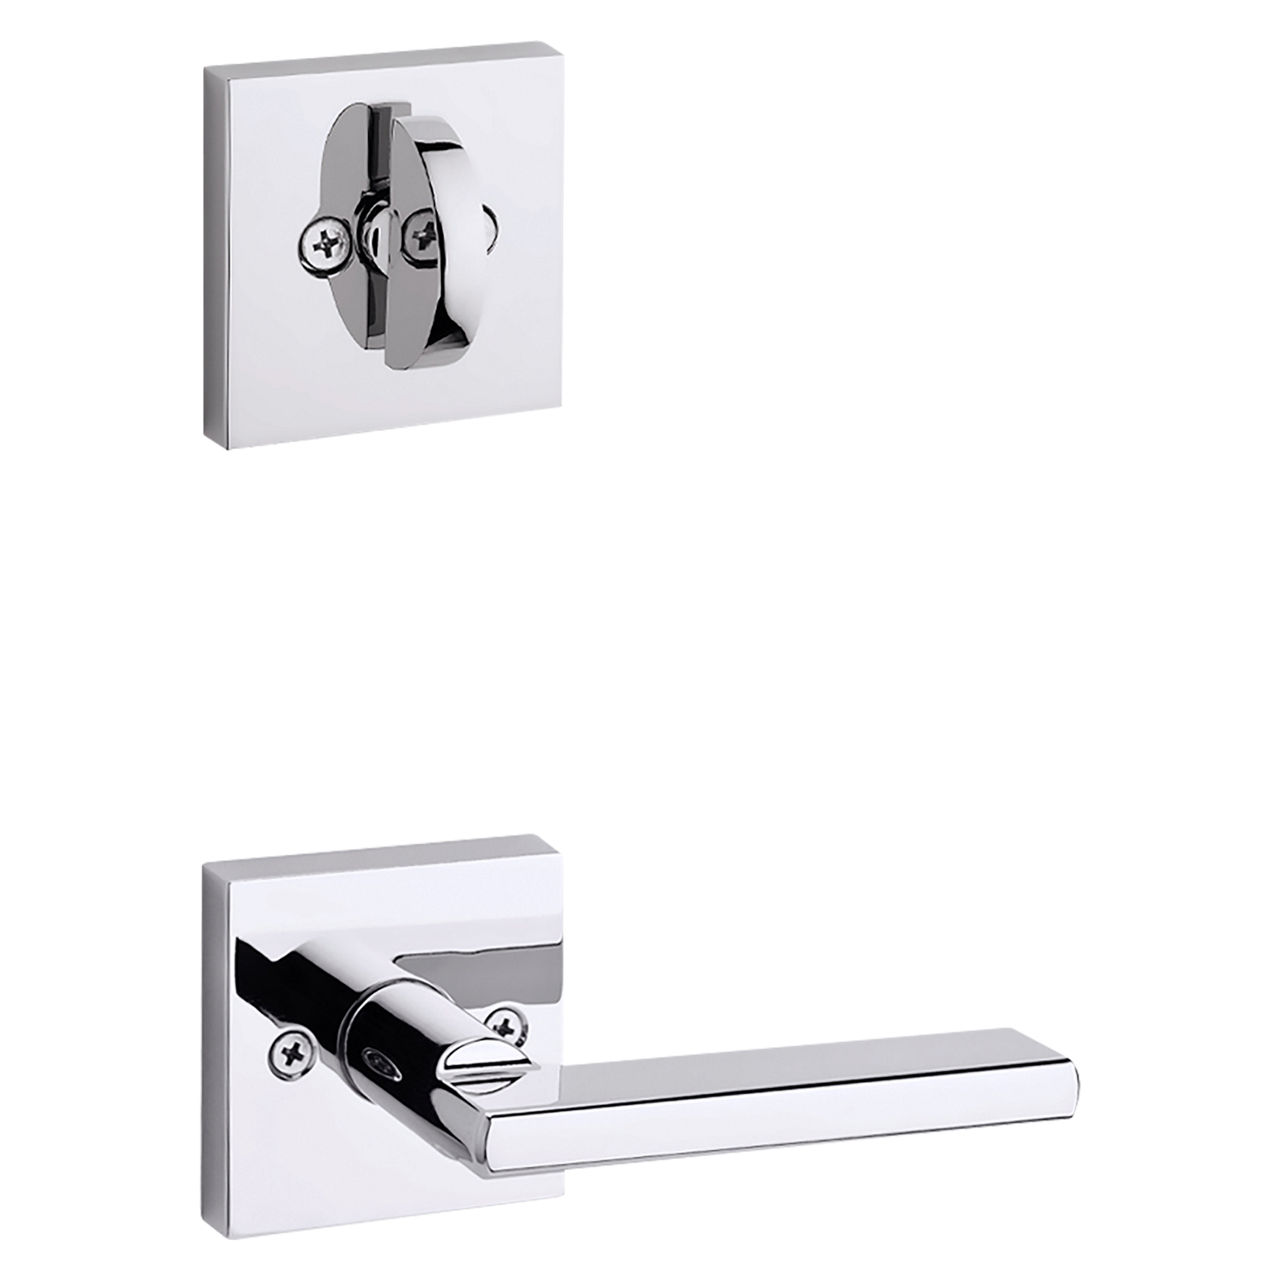 Halifax Lever (Square) and Deadbolt Interior Pack - for Weiser Series 9771 Handlesets